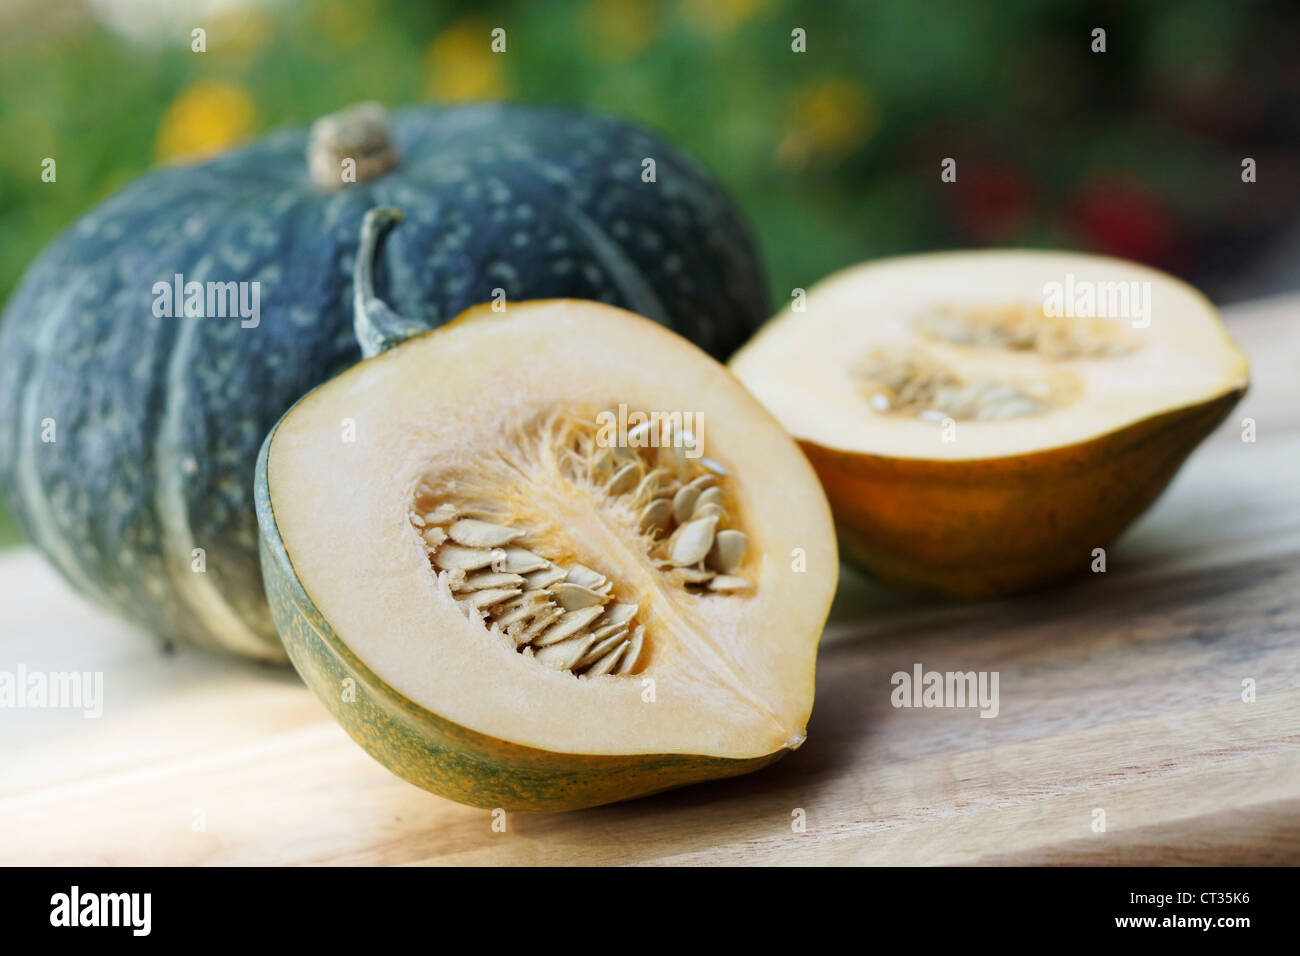 Acorn and Buttercup Squash, Vegetable Squashes Stock Photo